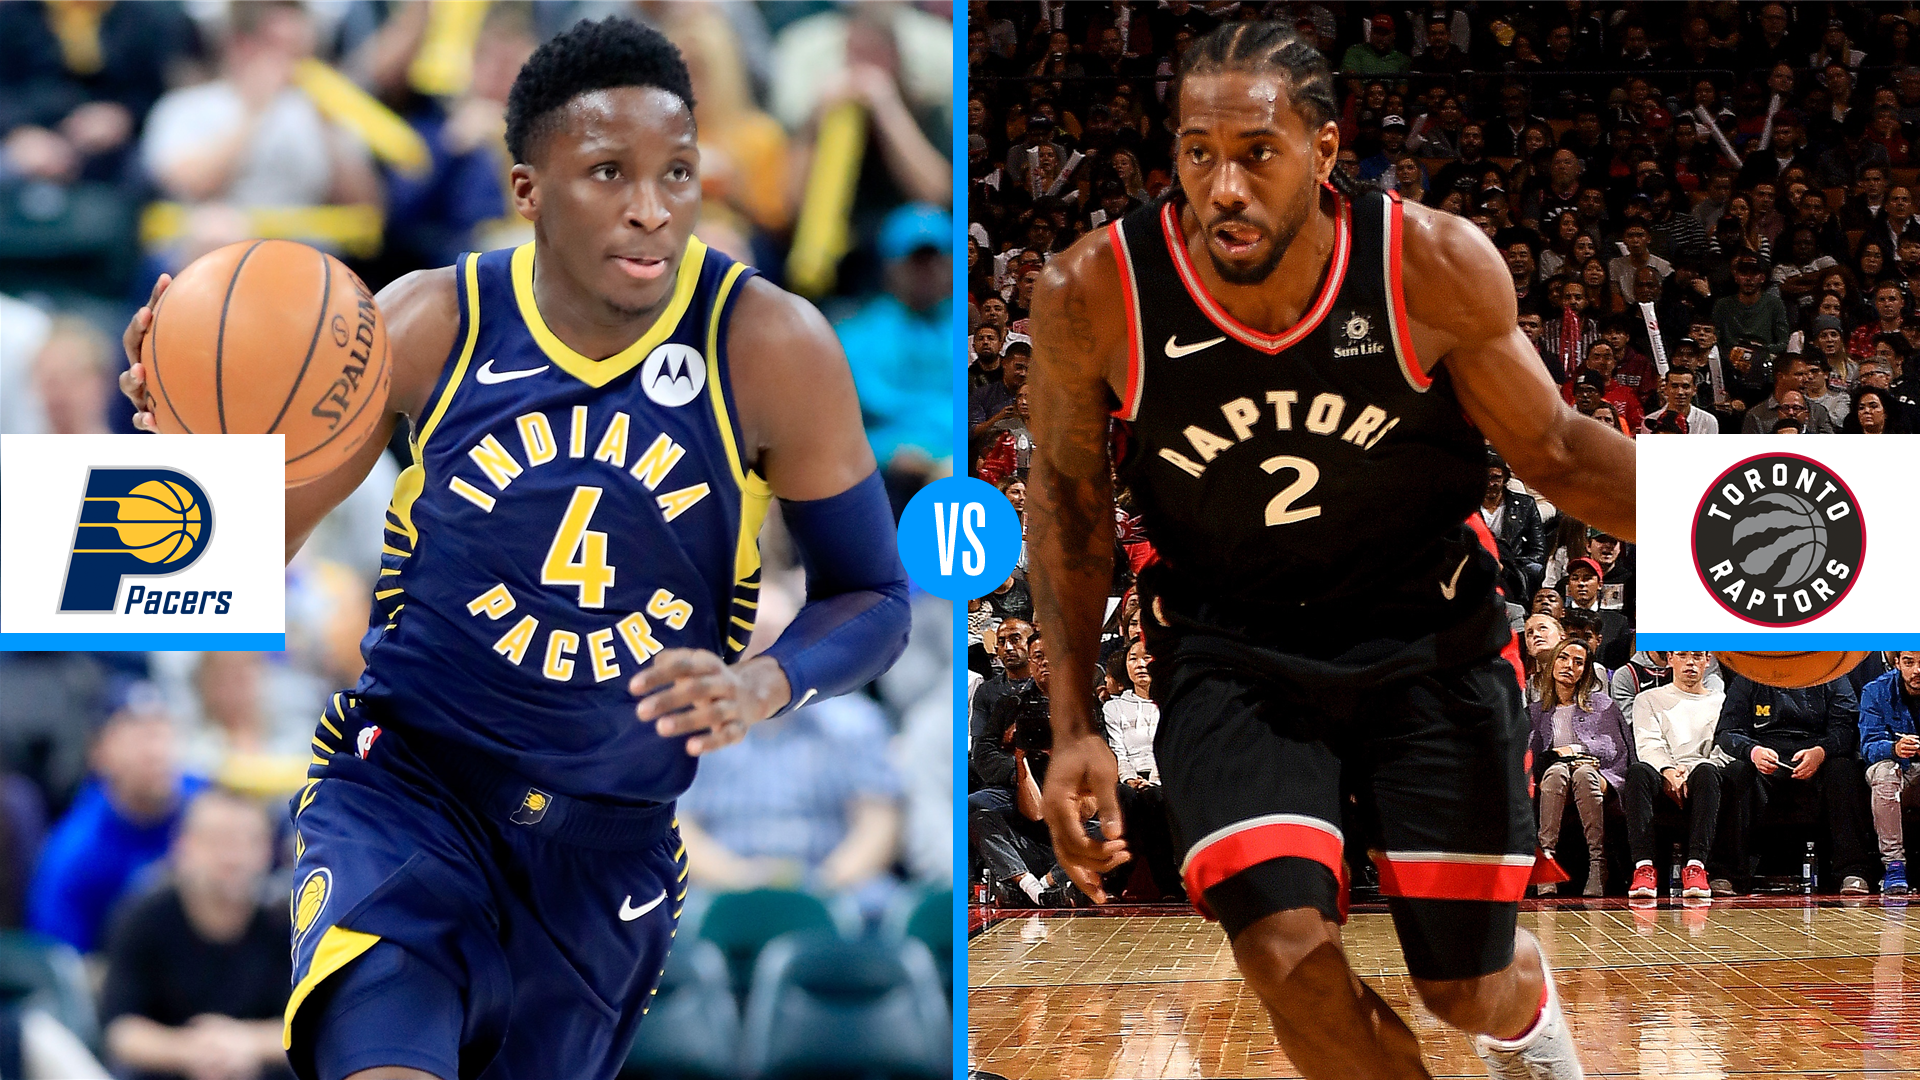 Indiana Pacers vs Toronto Raptors: Game preview, live stream, TV channel, start time ...